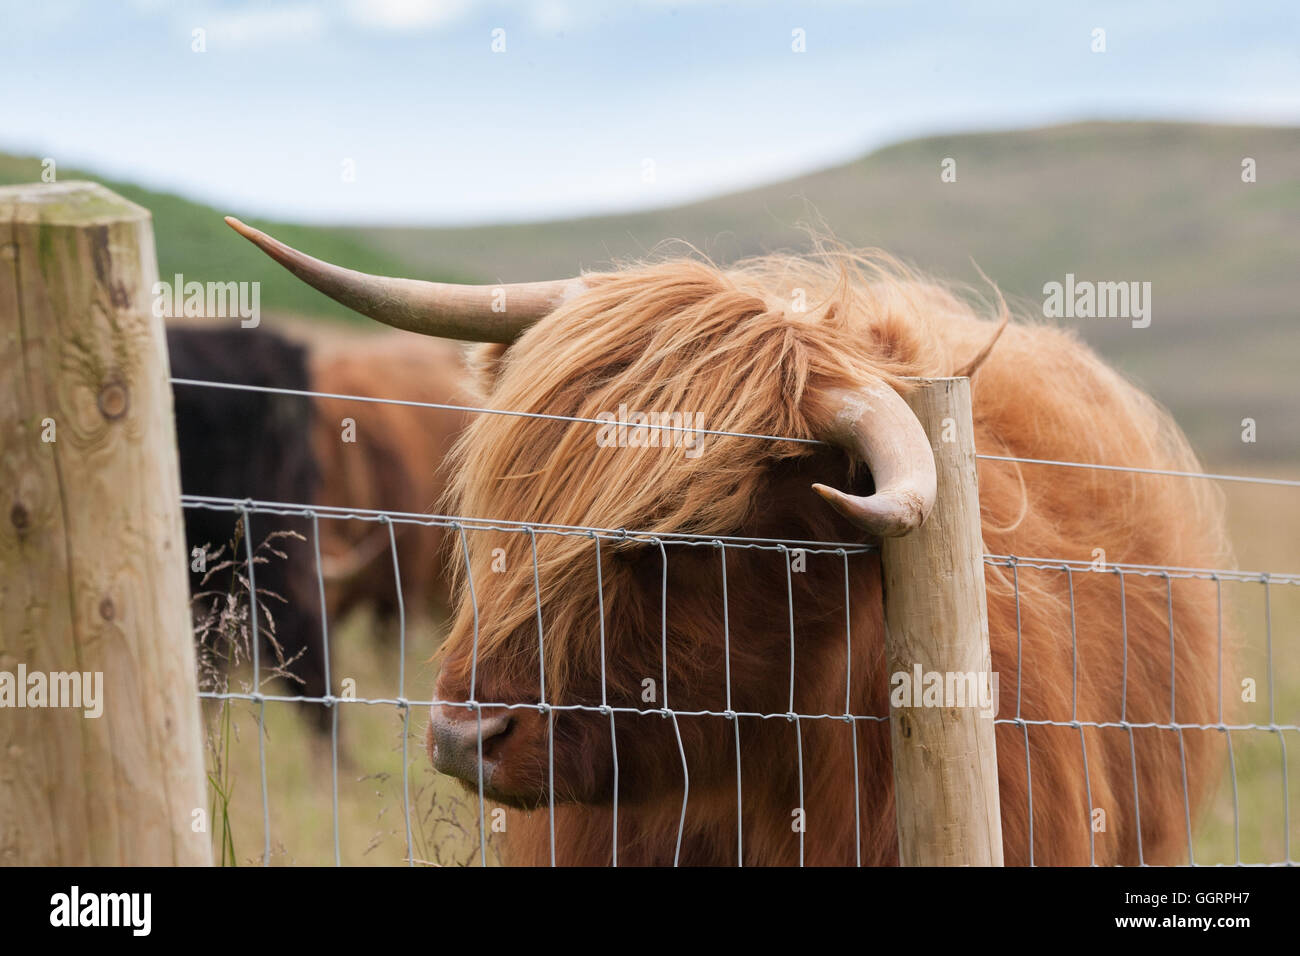 higland cow with itchy ear Stock Photo